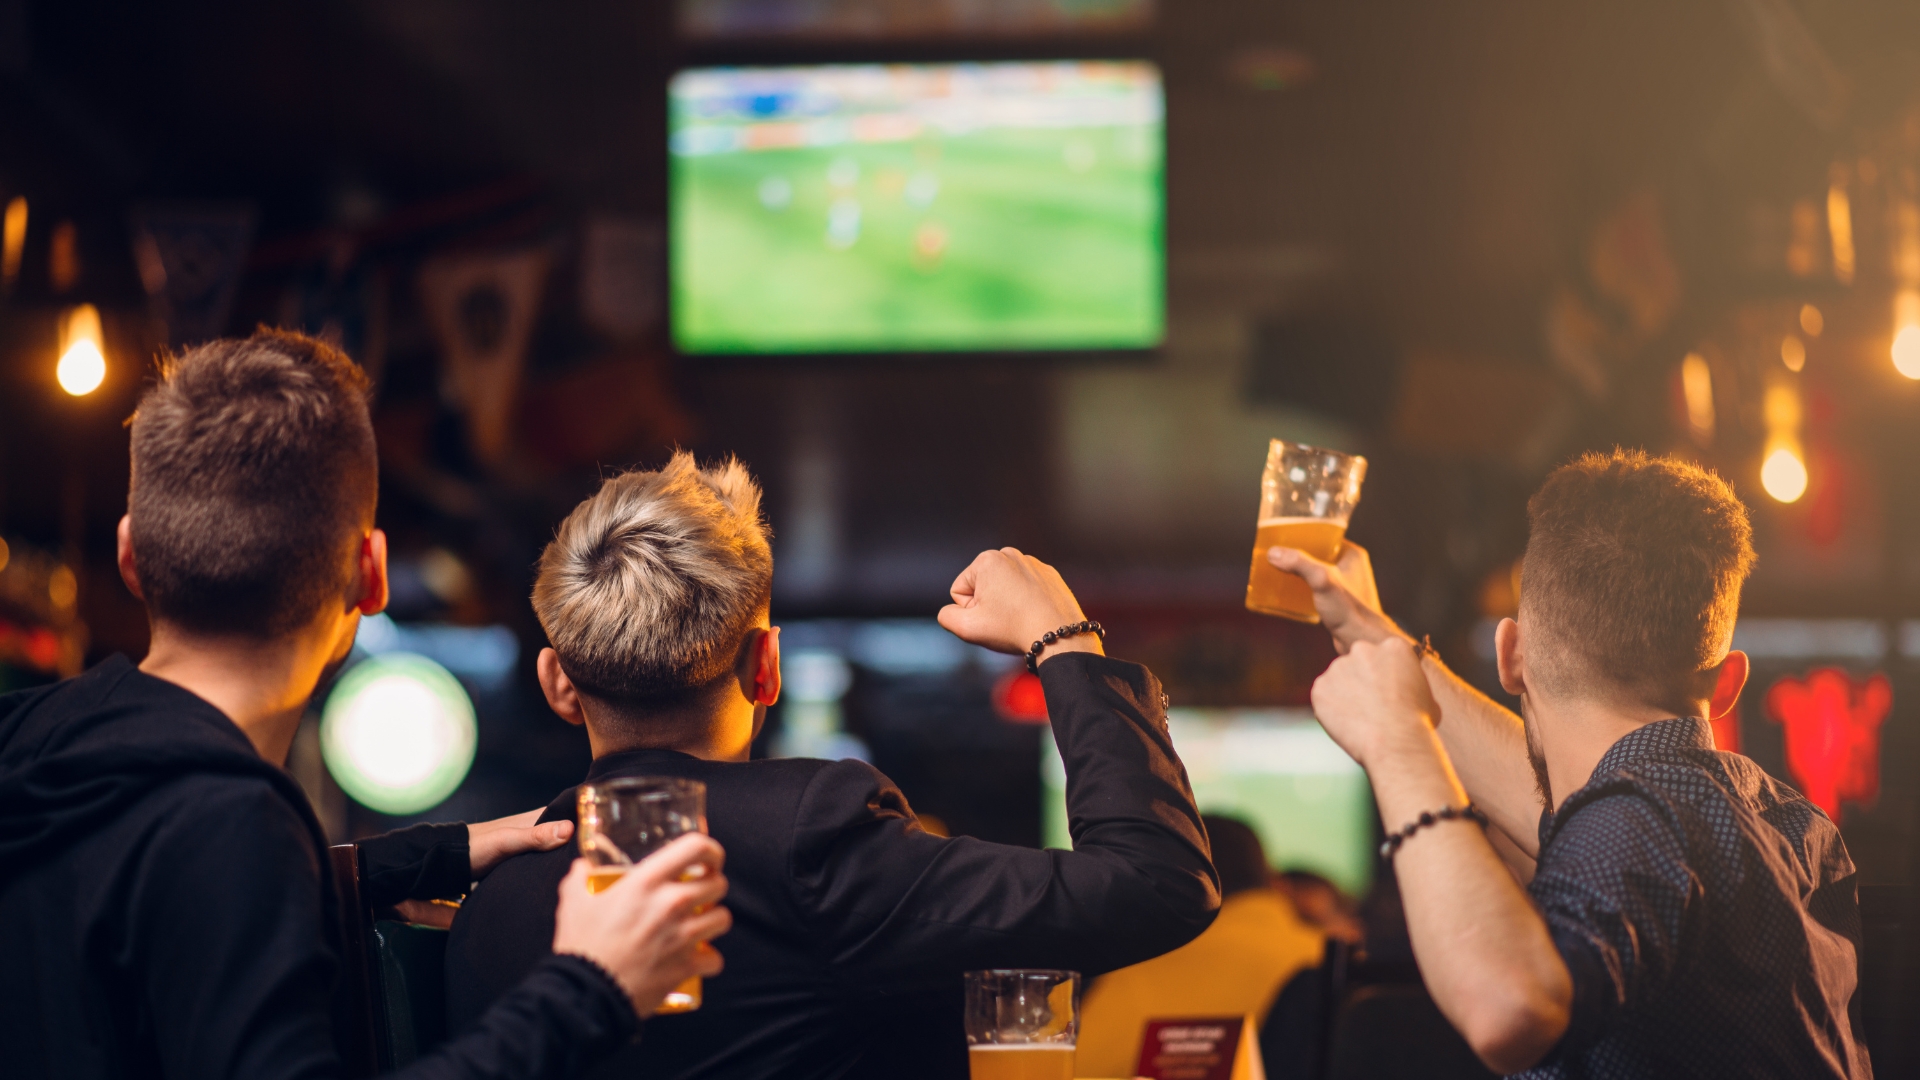 three men watching football at a bar called lucky bar day wearing black shirts and carrying beers